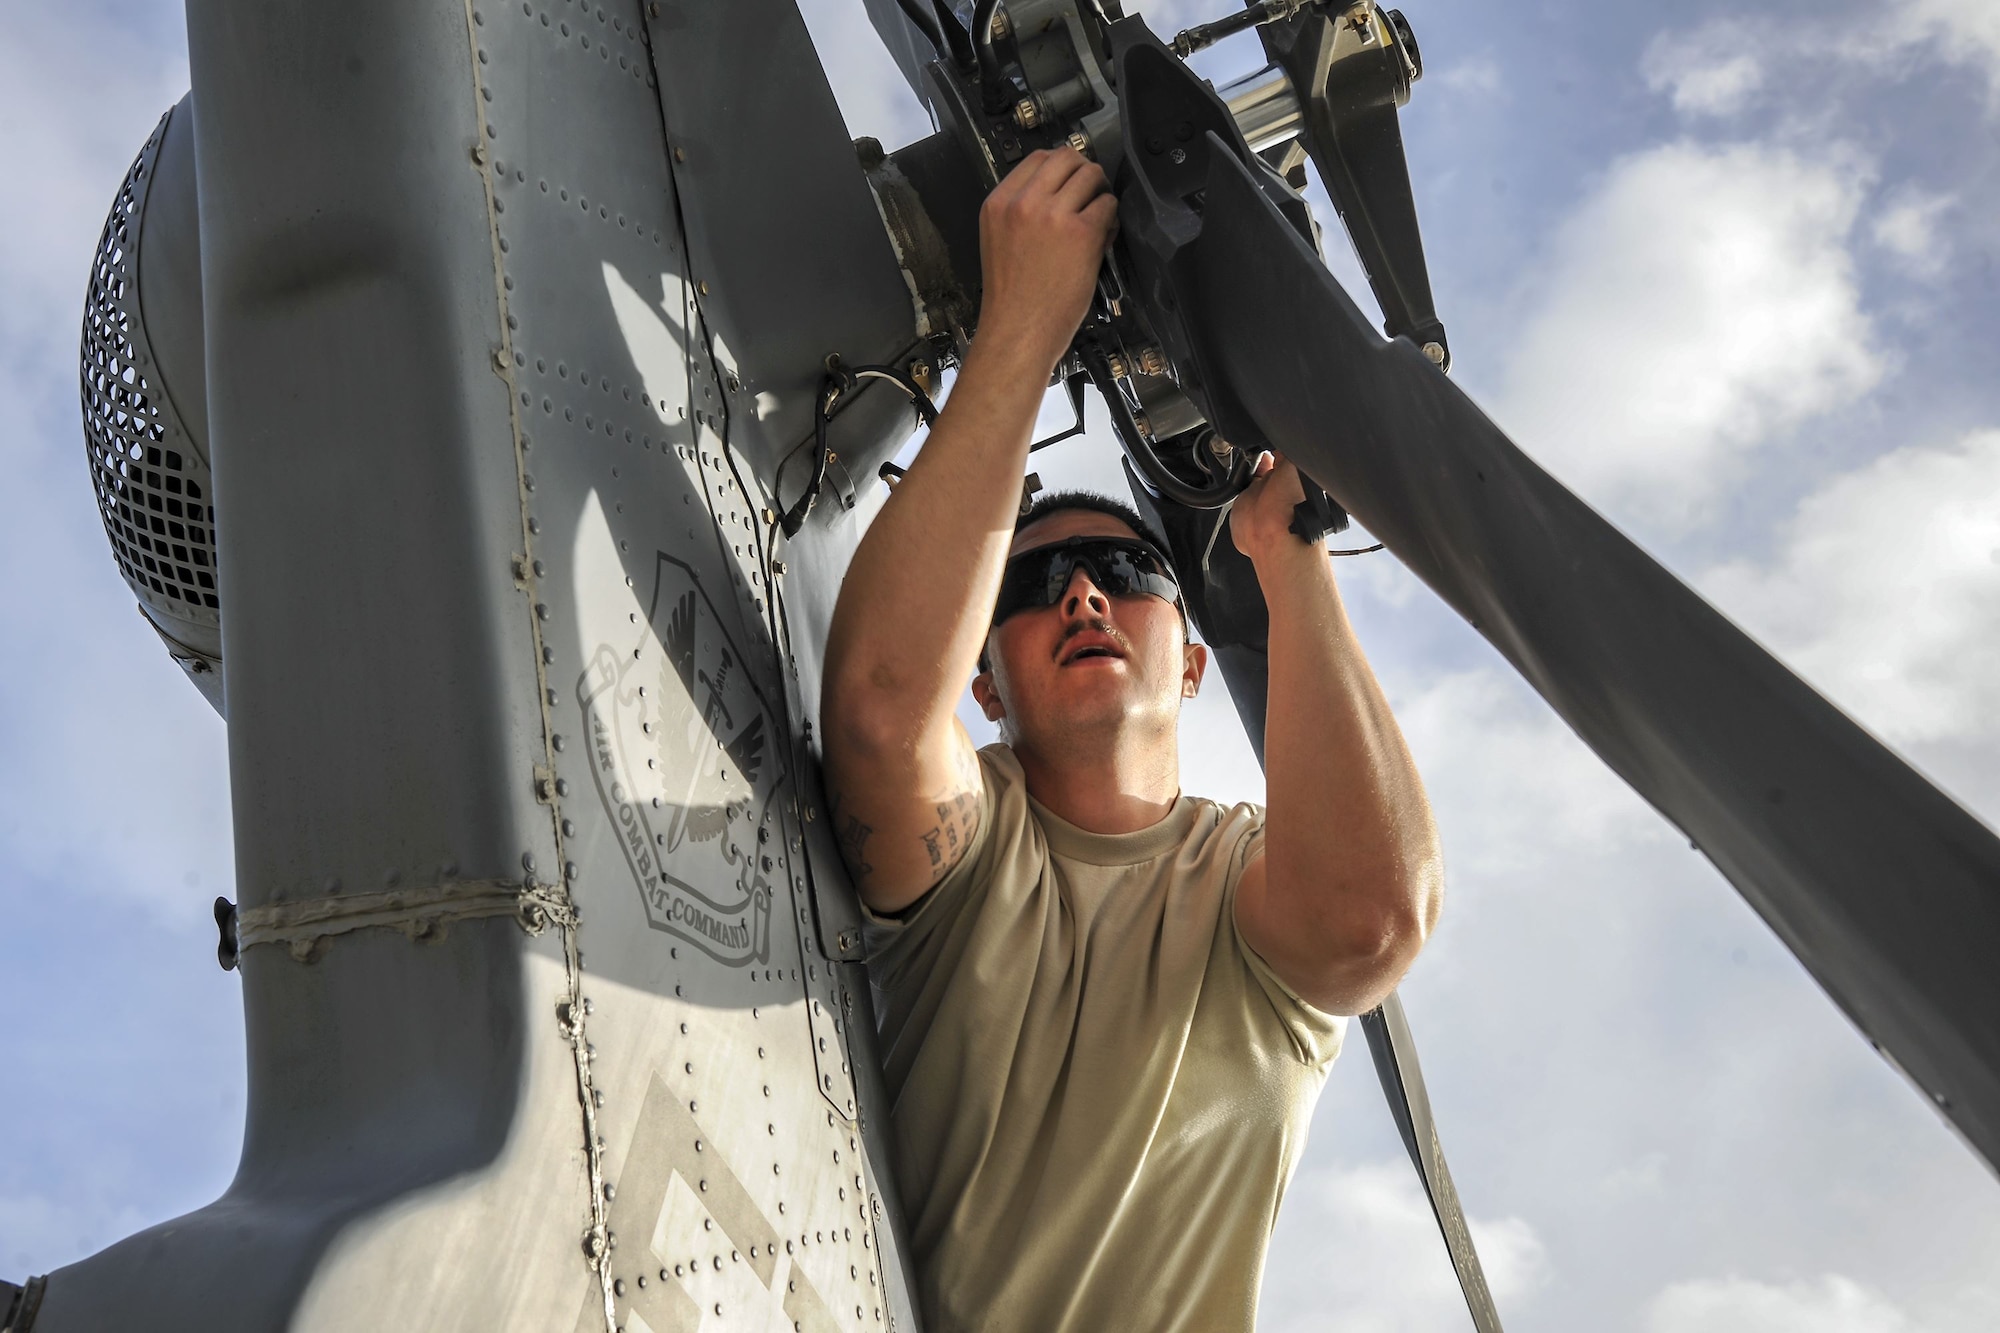 Senior Airman Trevor Krutsch, 723d Aircraft Maintenance Squadron hydraulics systems apprentice, unfolds the rotor of an HH-60G Pave Hawk, Dec. 5, 2017, at Moody Air Force Base, Ga. As part of a Phase 1, Phase 2 exercise, the 23d Wing is evaluating its operations, maintenance and logistics to determine its readiness to rapidly deploy. Airmen from the 723d Aircraft Maintenance Squadron folded the main and tail rotor blades inward to make it easier to transport and then unfolded the rotors to practice making the helicopter operational. (U.S. Air Force photo by Airman Eugene Oliver)